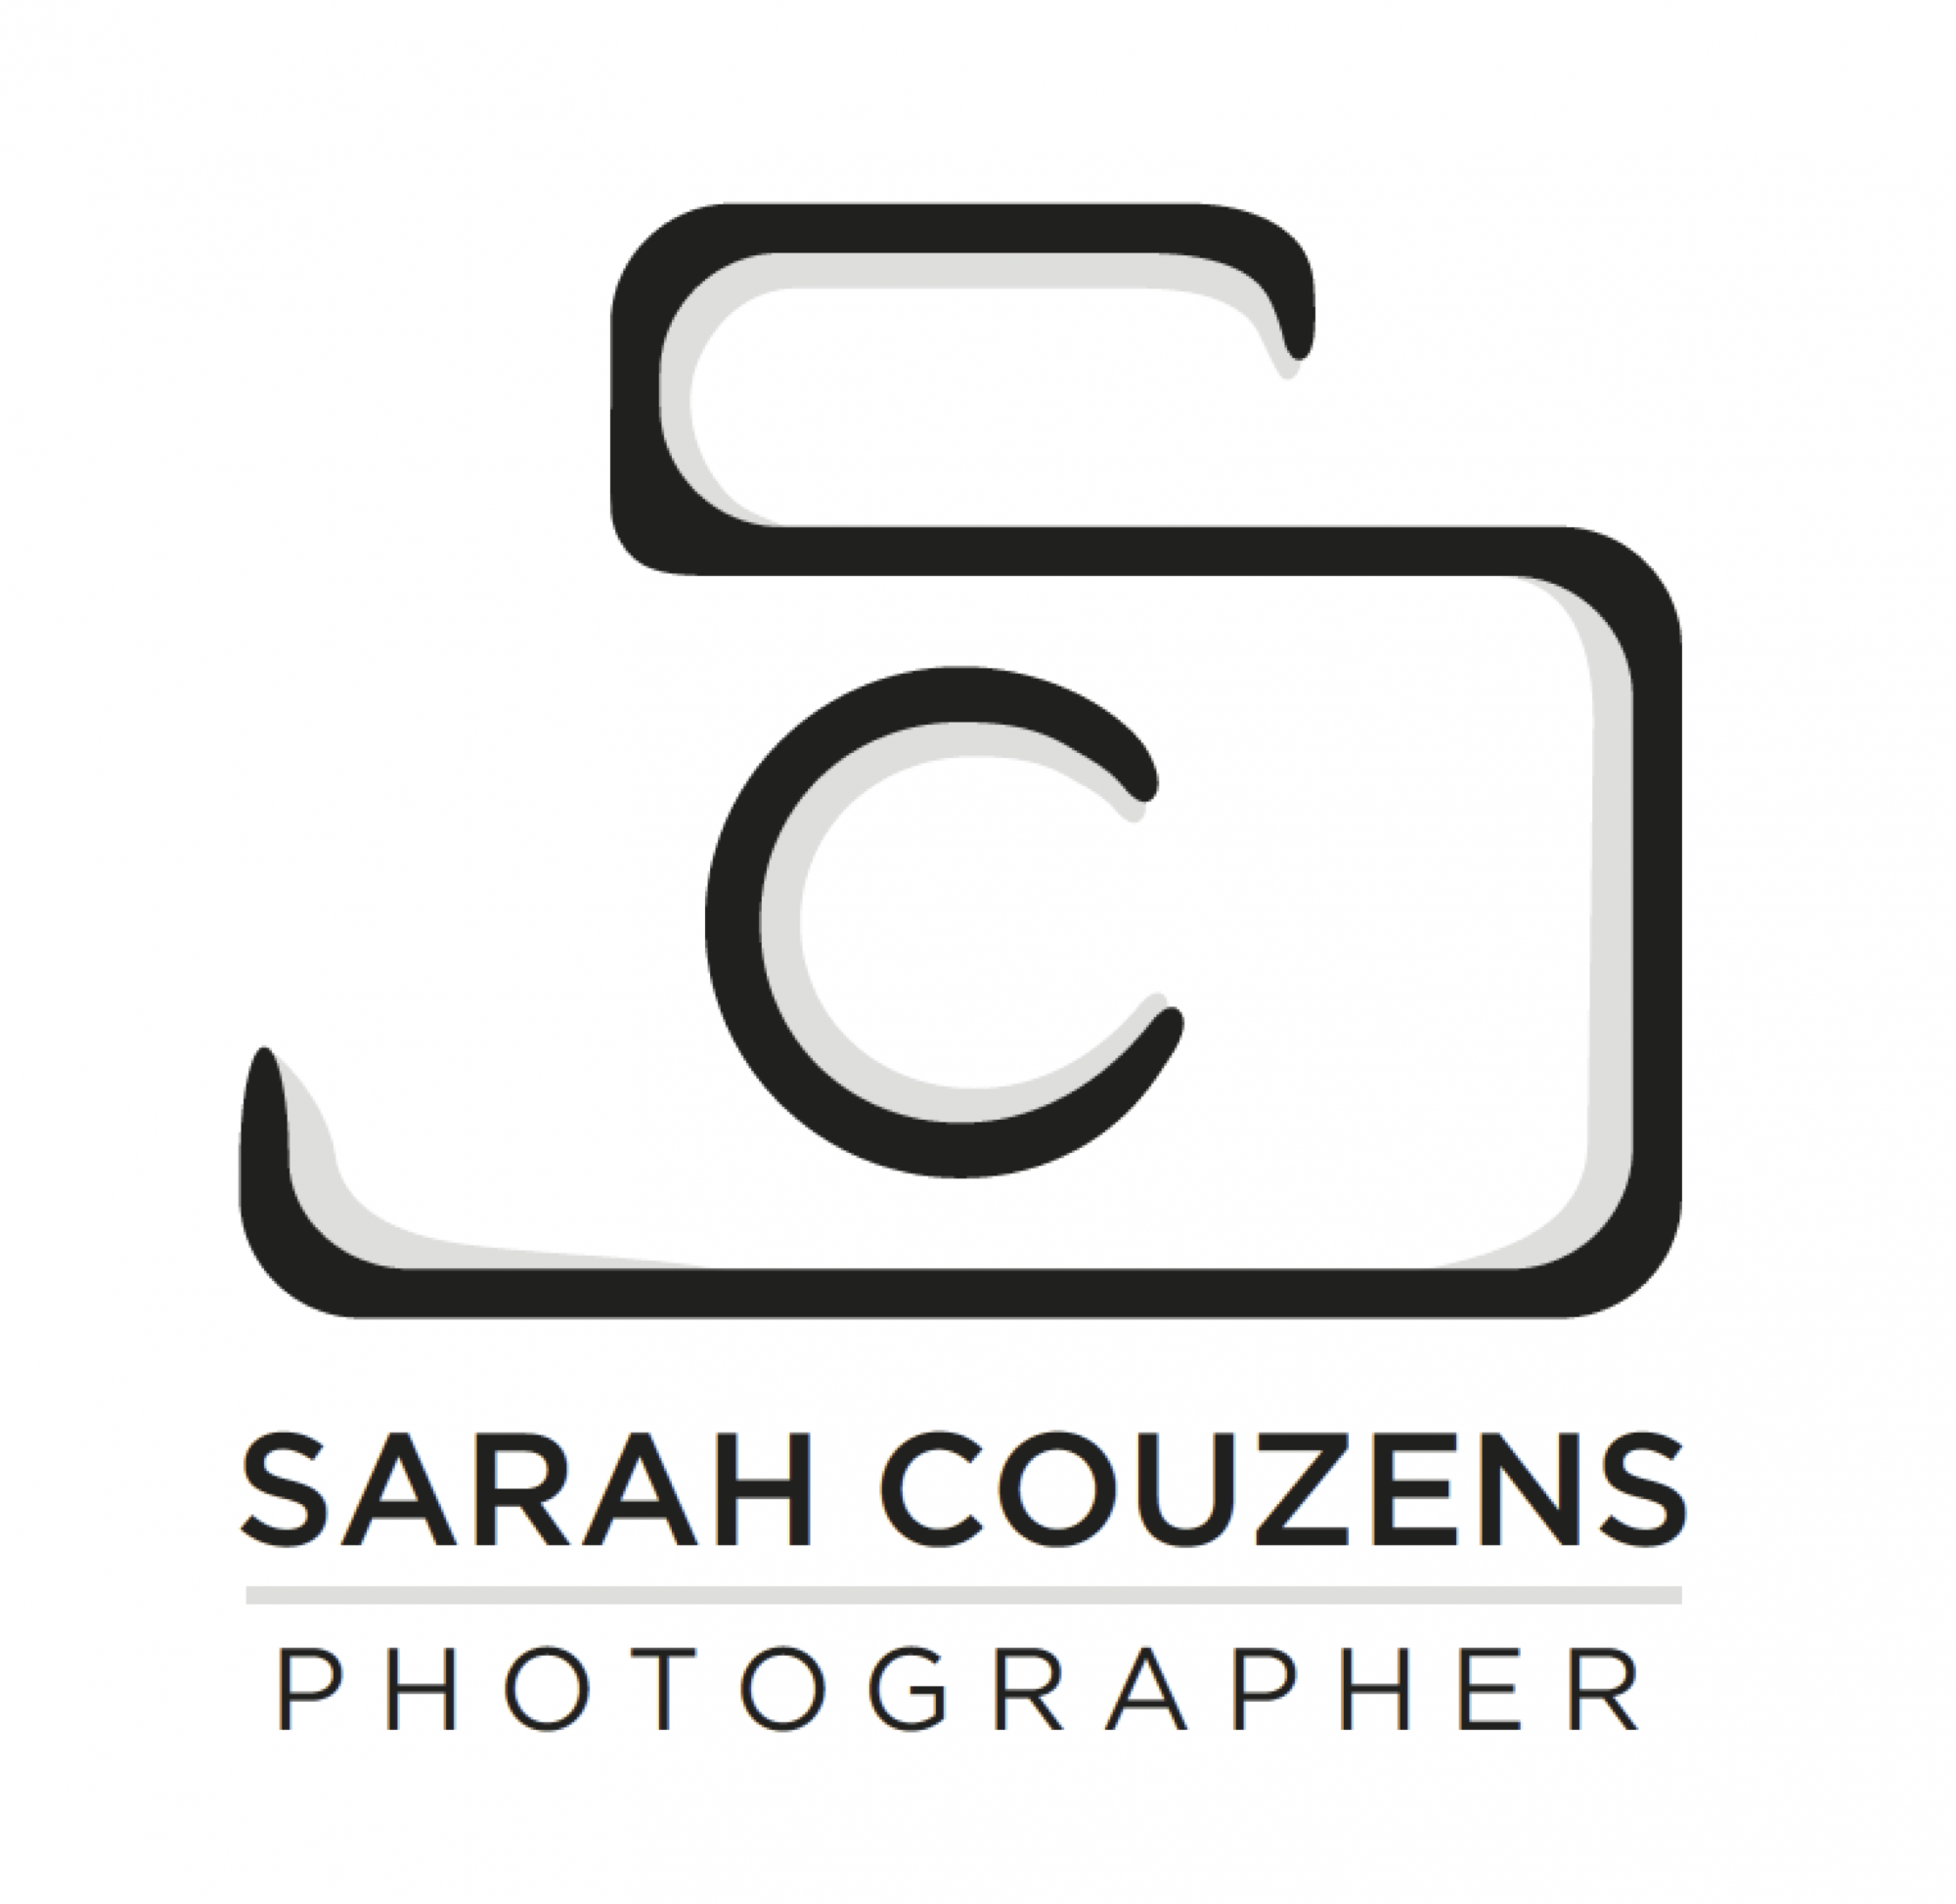 Sarah Couzens - Photographer | Brands of the World™ | Download ...